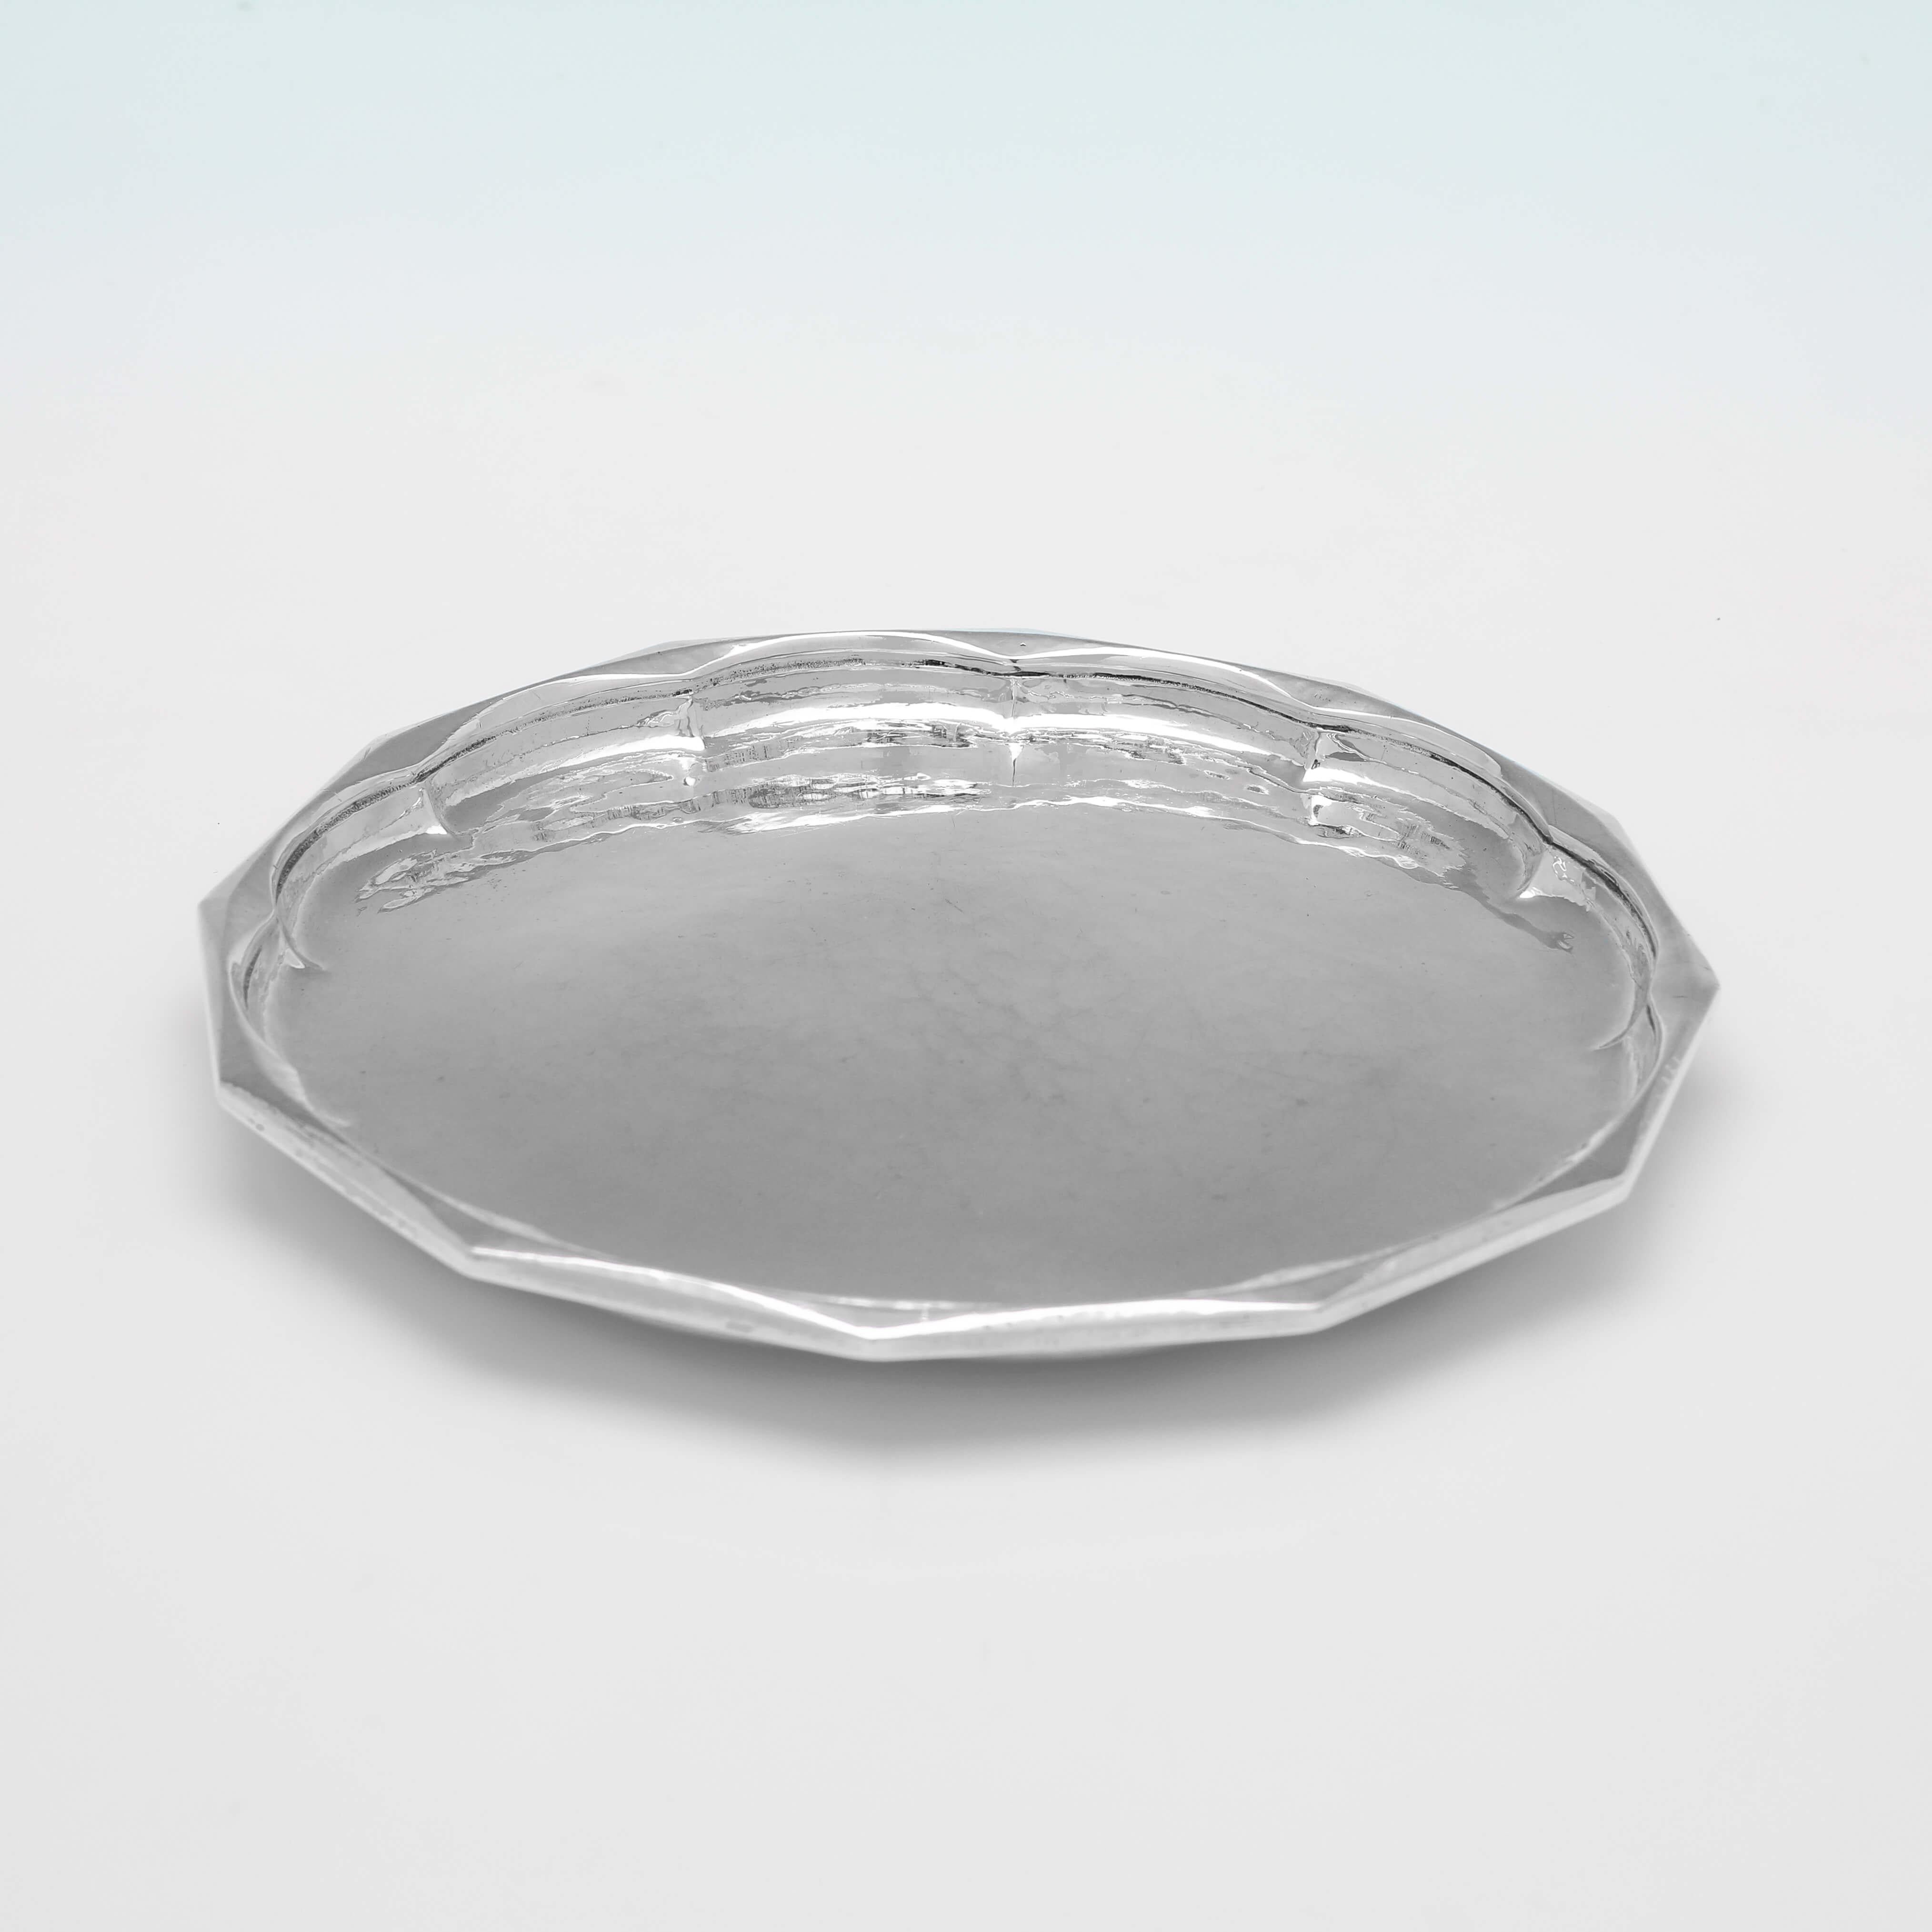 Arts and Crafts Omar Ramsden Me Fecit - sterling silver dish in the arts & crafts style - 1934 For Sale